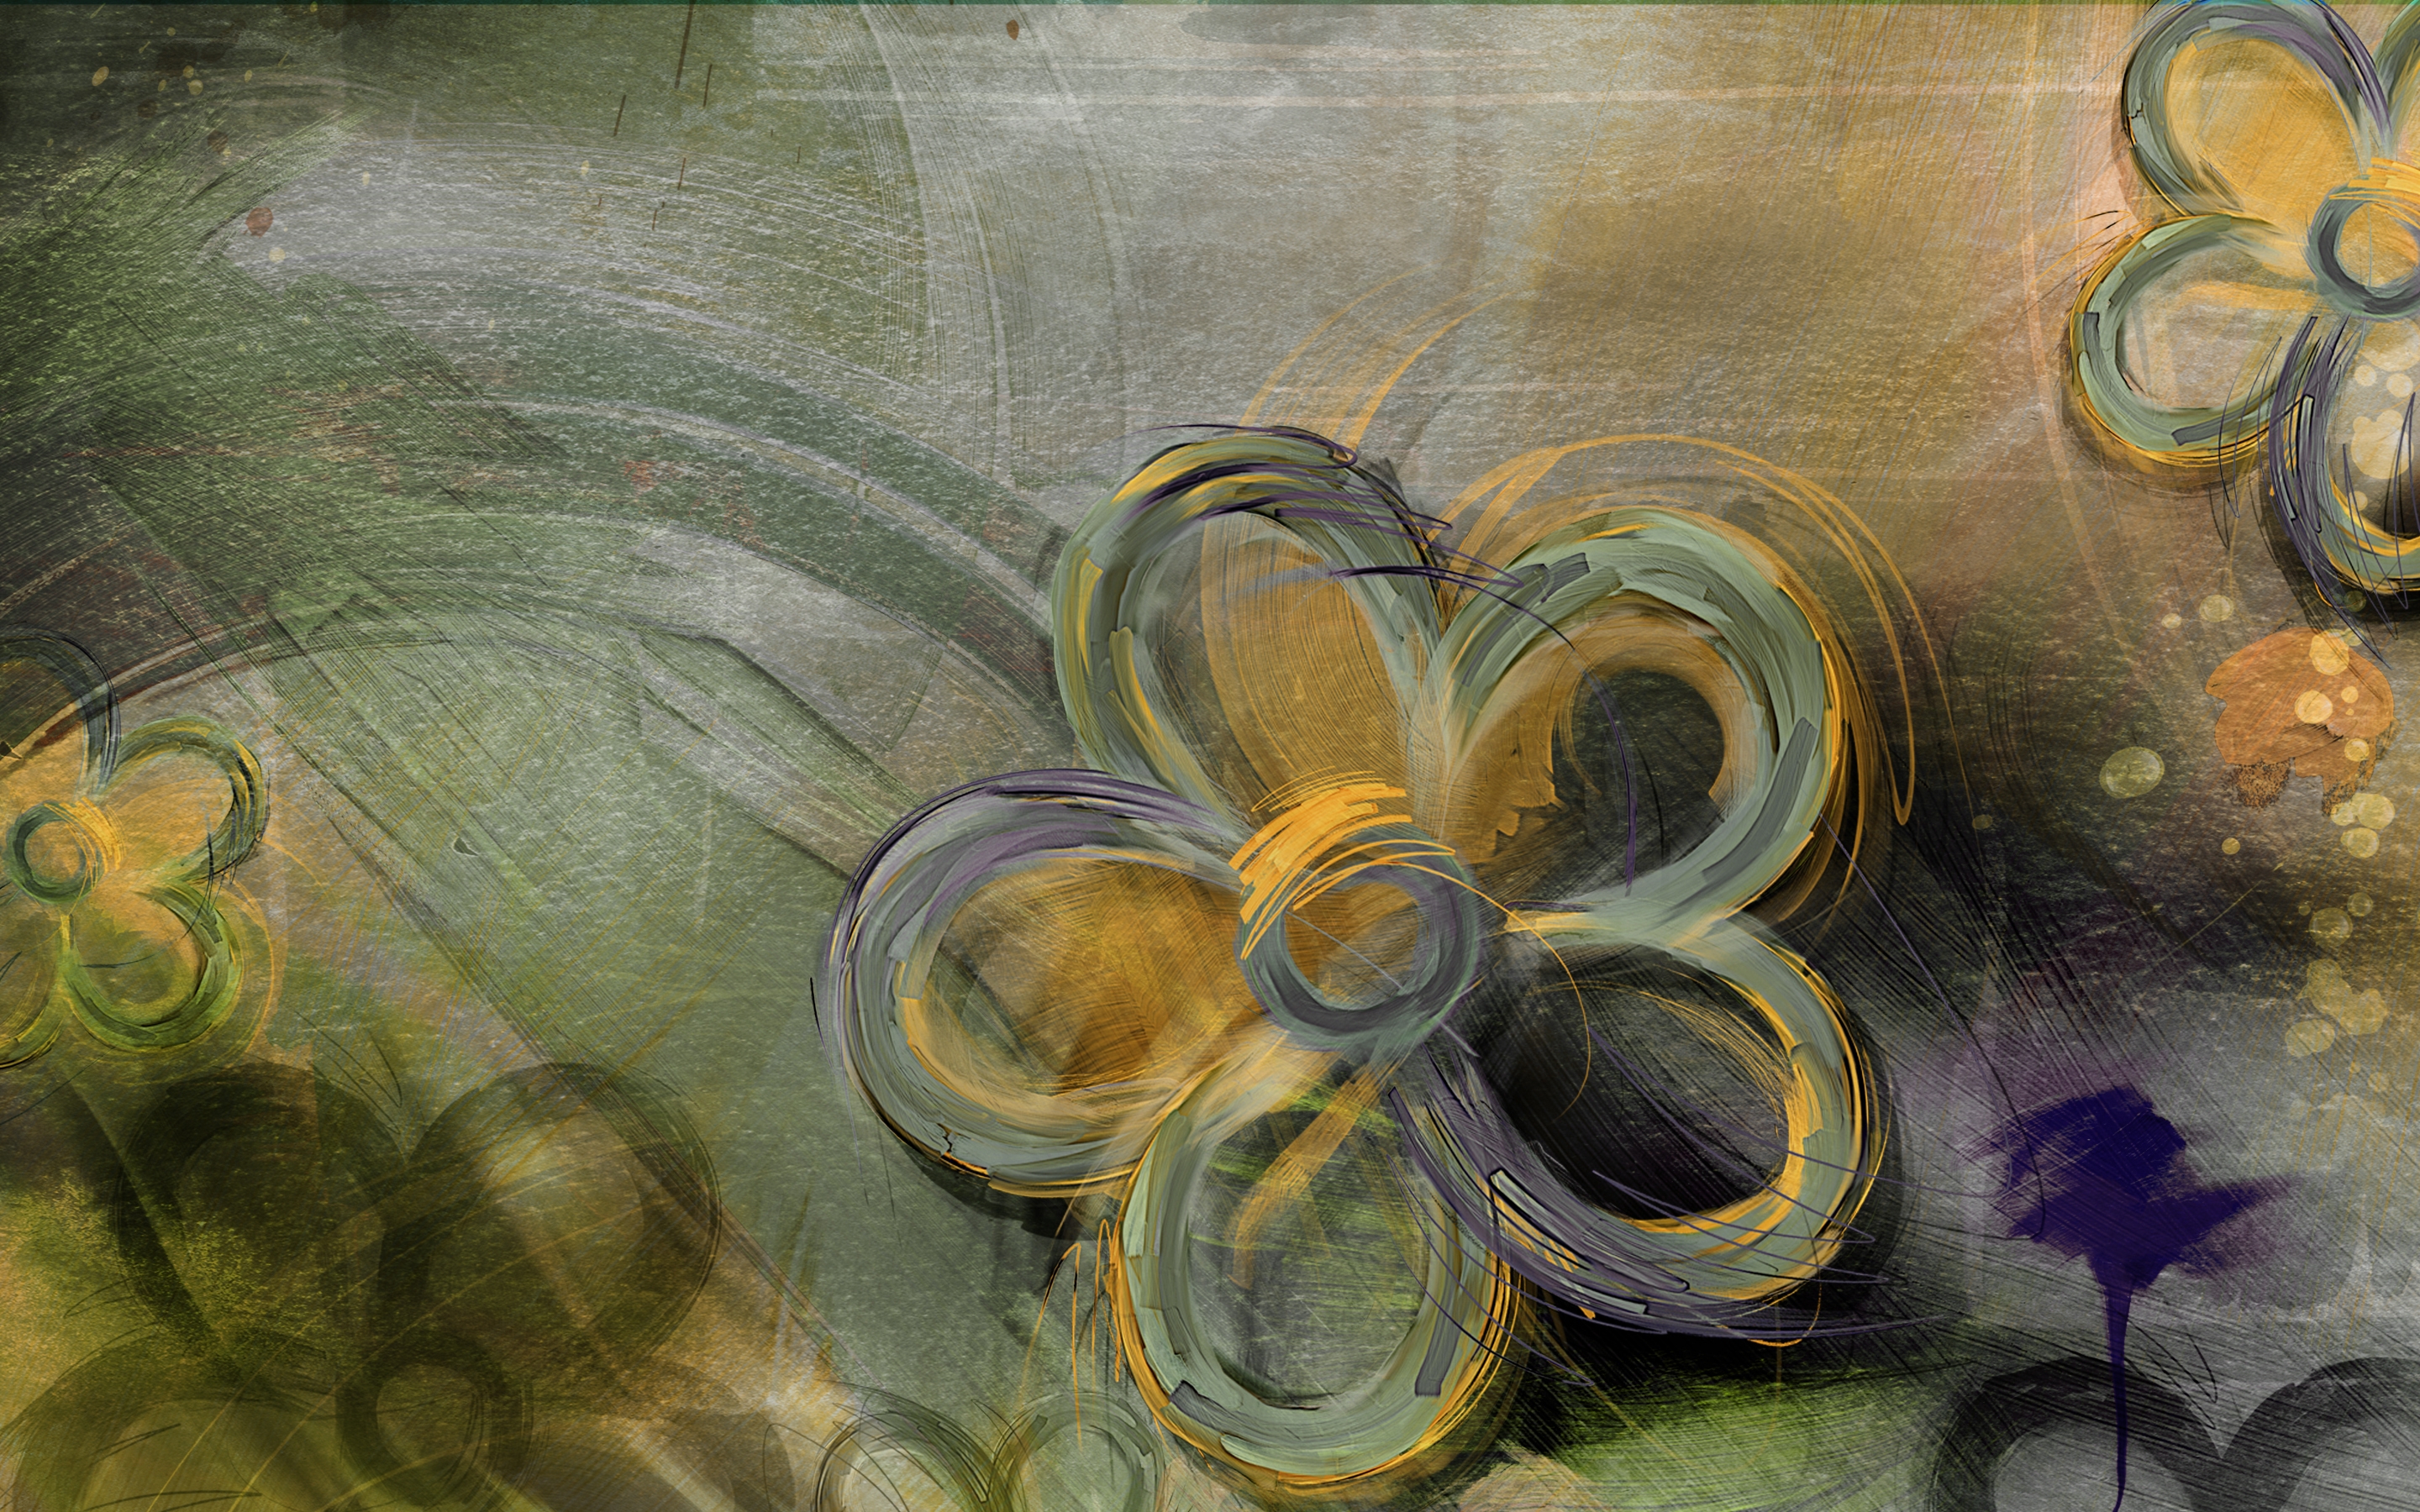 textures, flowers, texture, drawn, yellow green